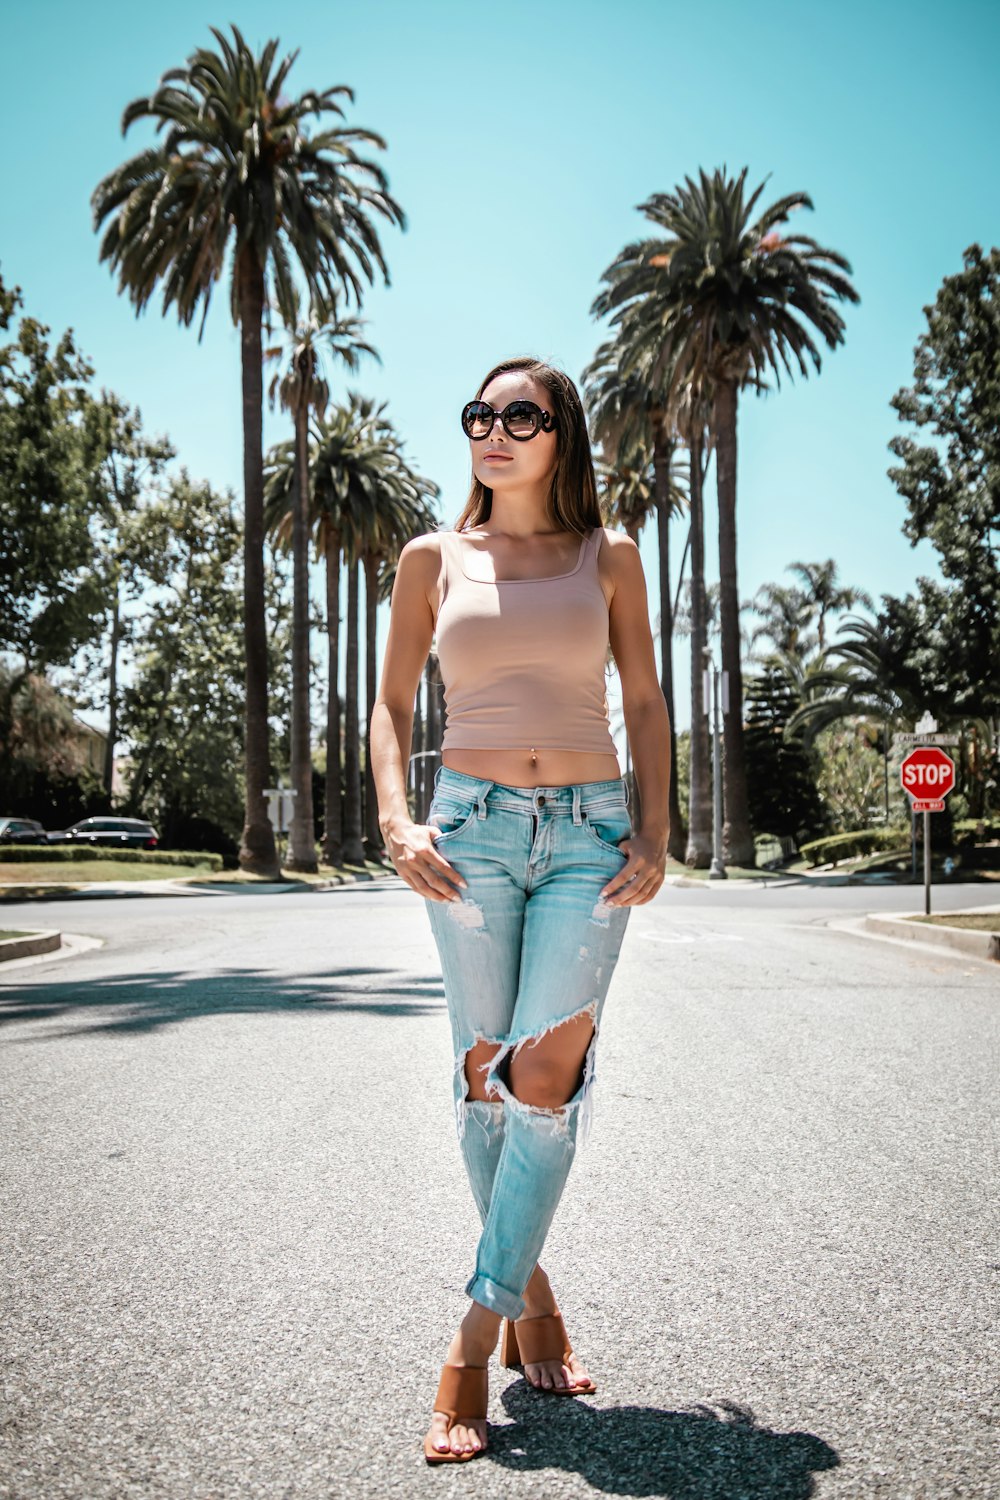 woman in white tank top and blue denim shorts standing on road during daytime